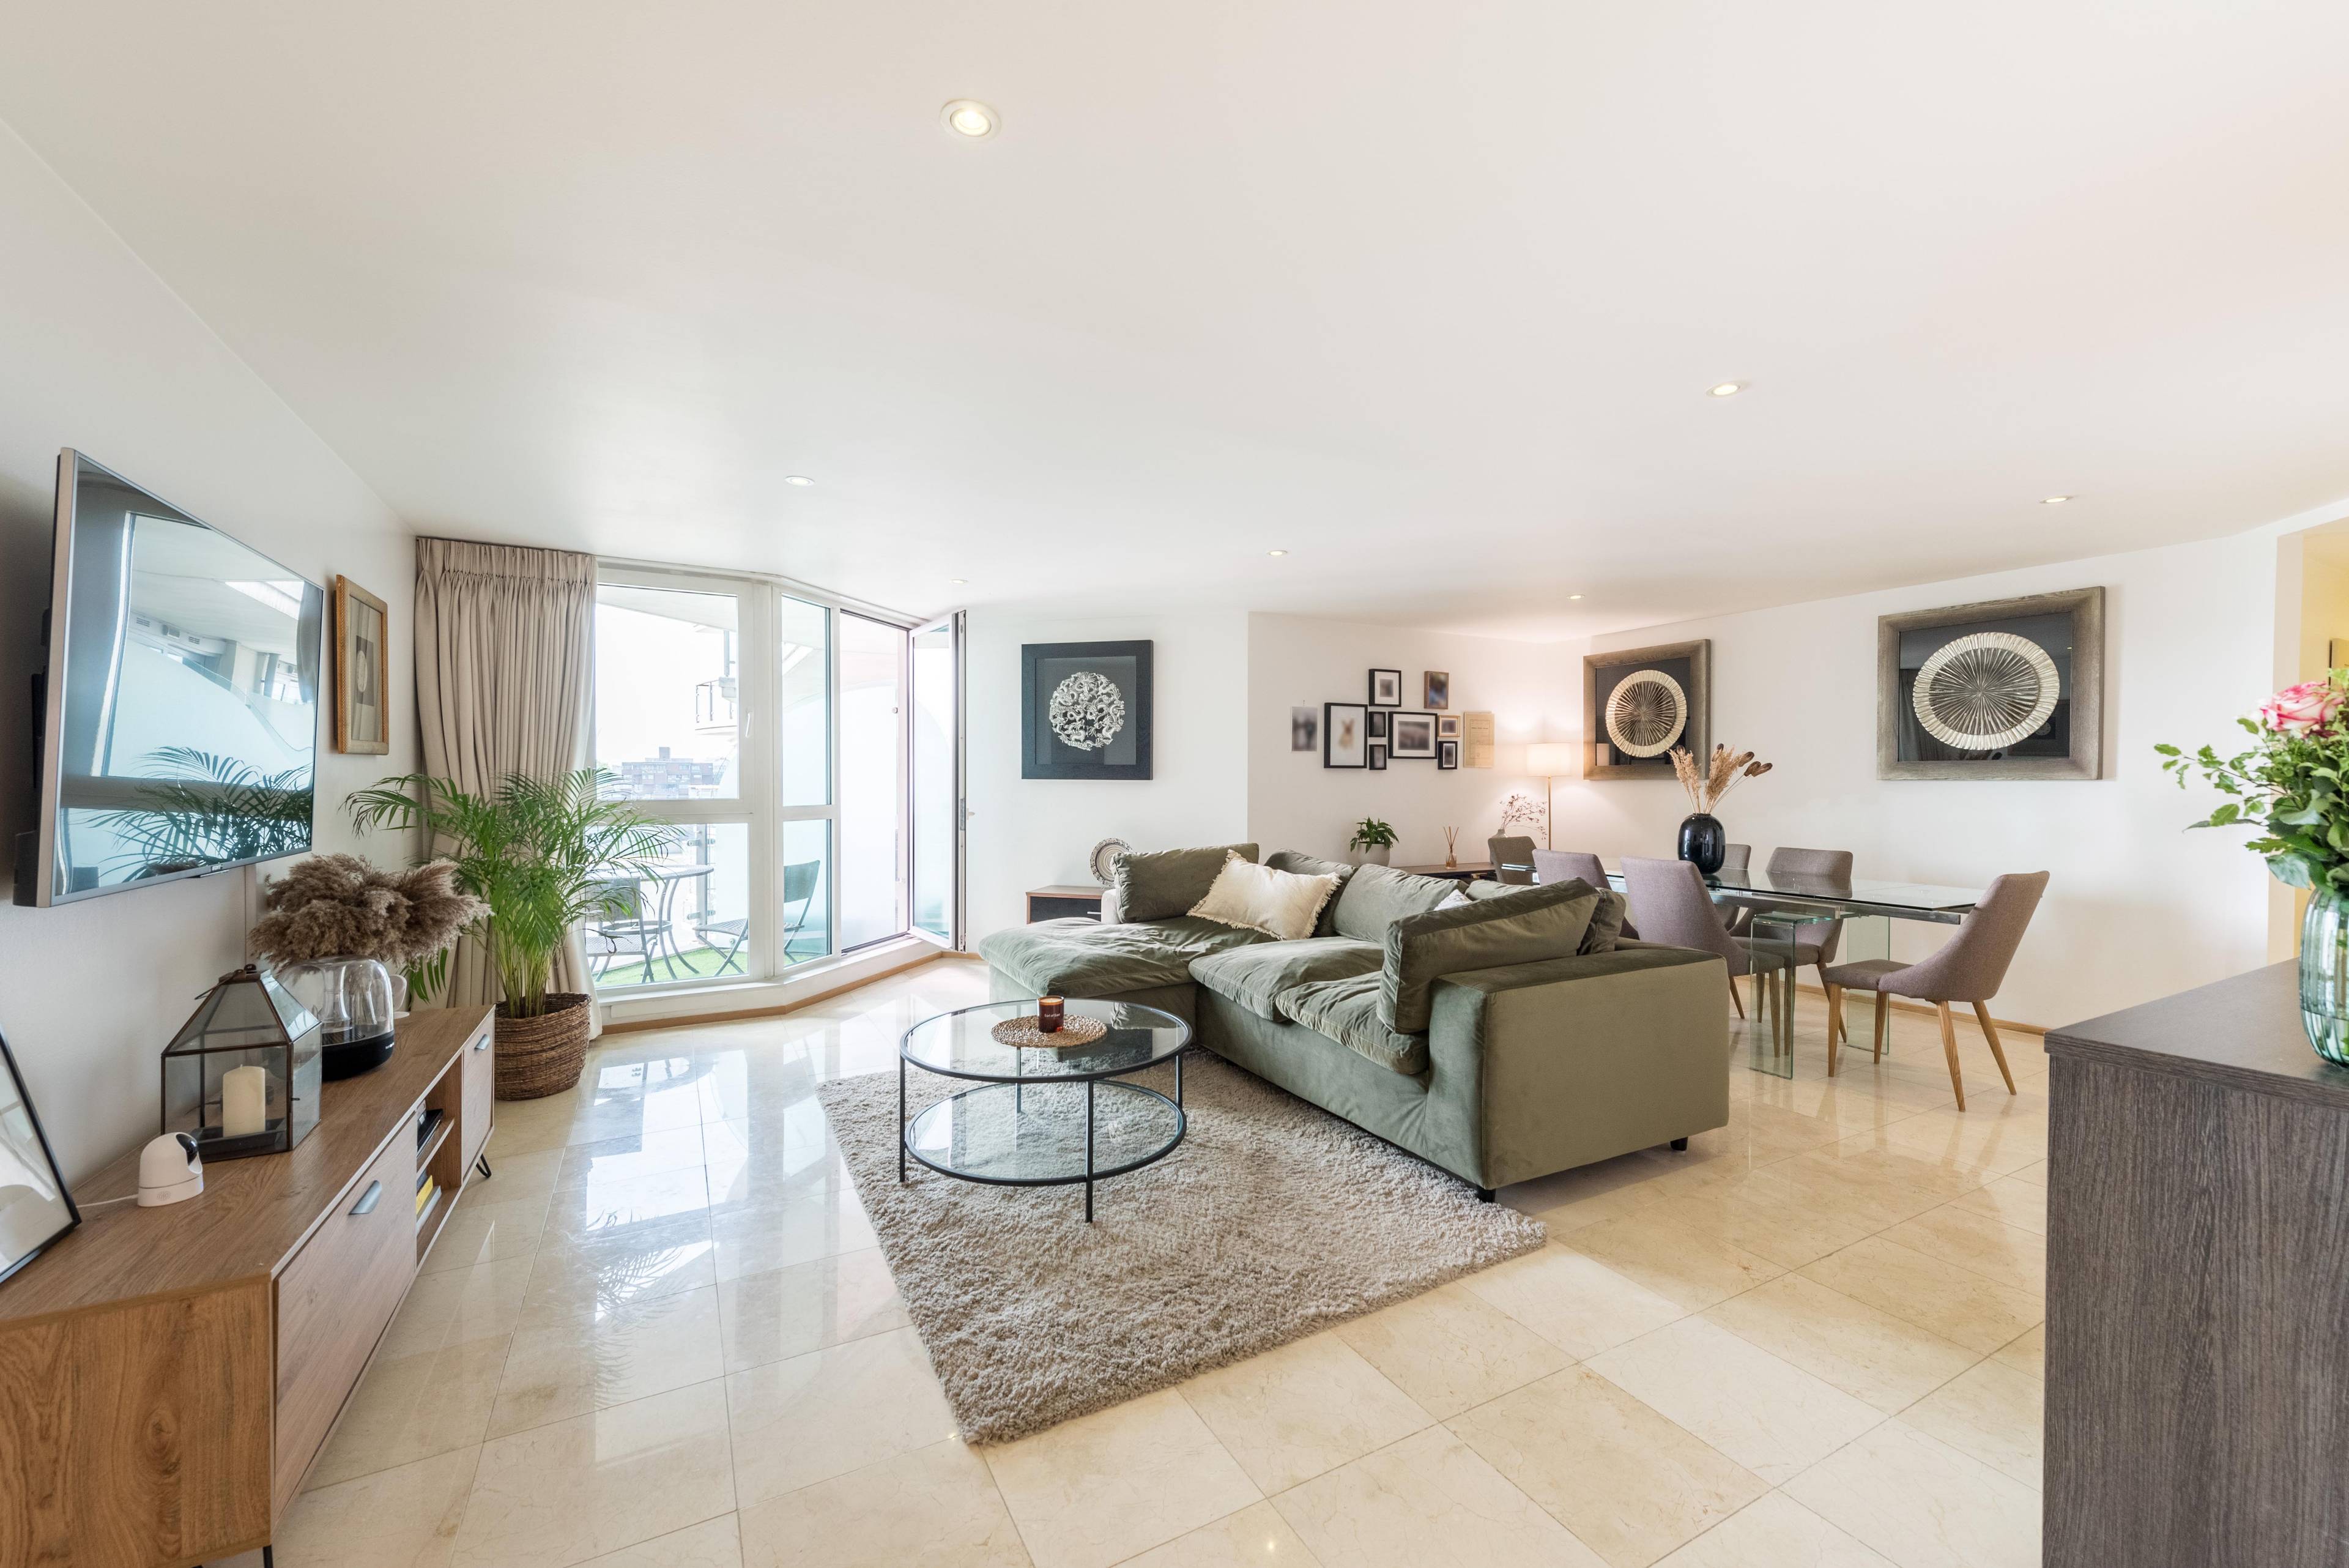 Spanning over 1,025 sq ft, this generously large 2-bed and 2.5-bath residence is available at the award winning riverside development, St George Wharf. Residents benefit from dual aspect apartment with river views.